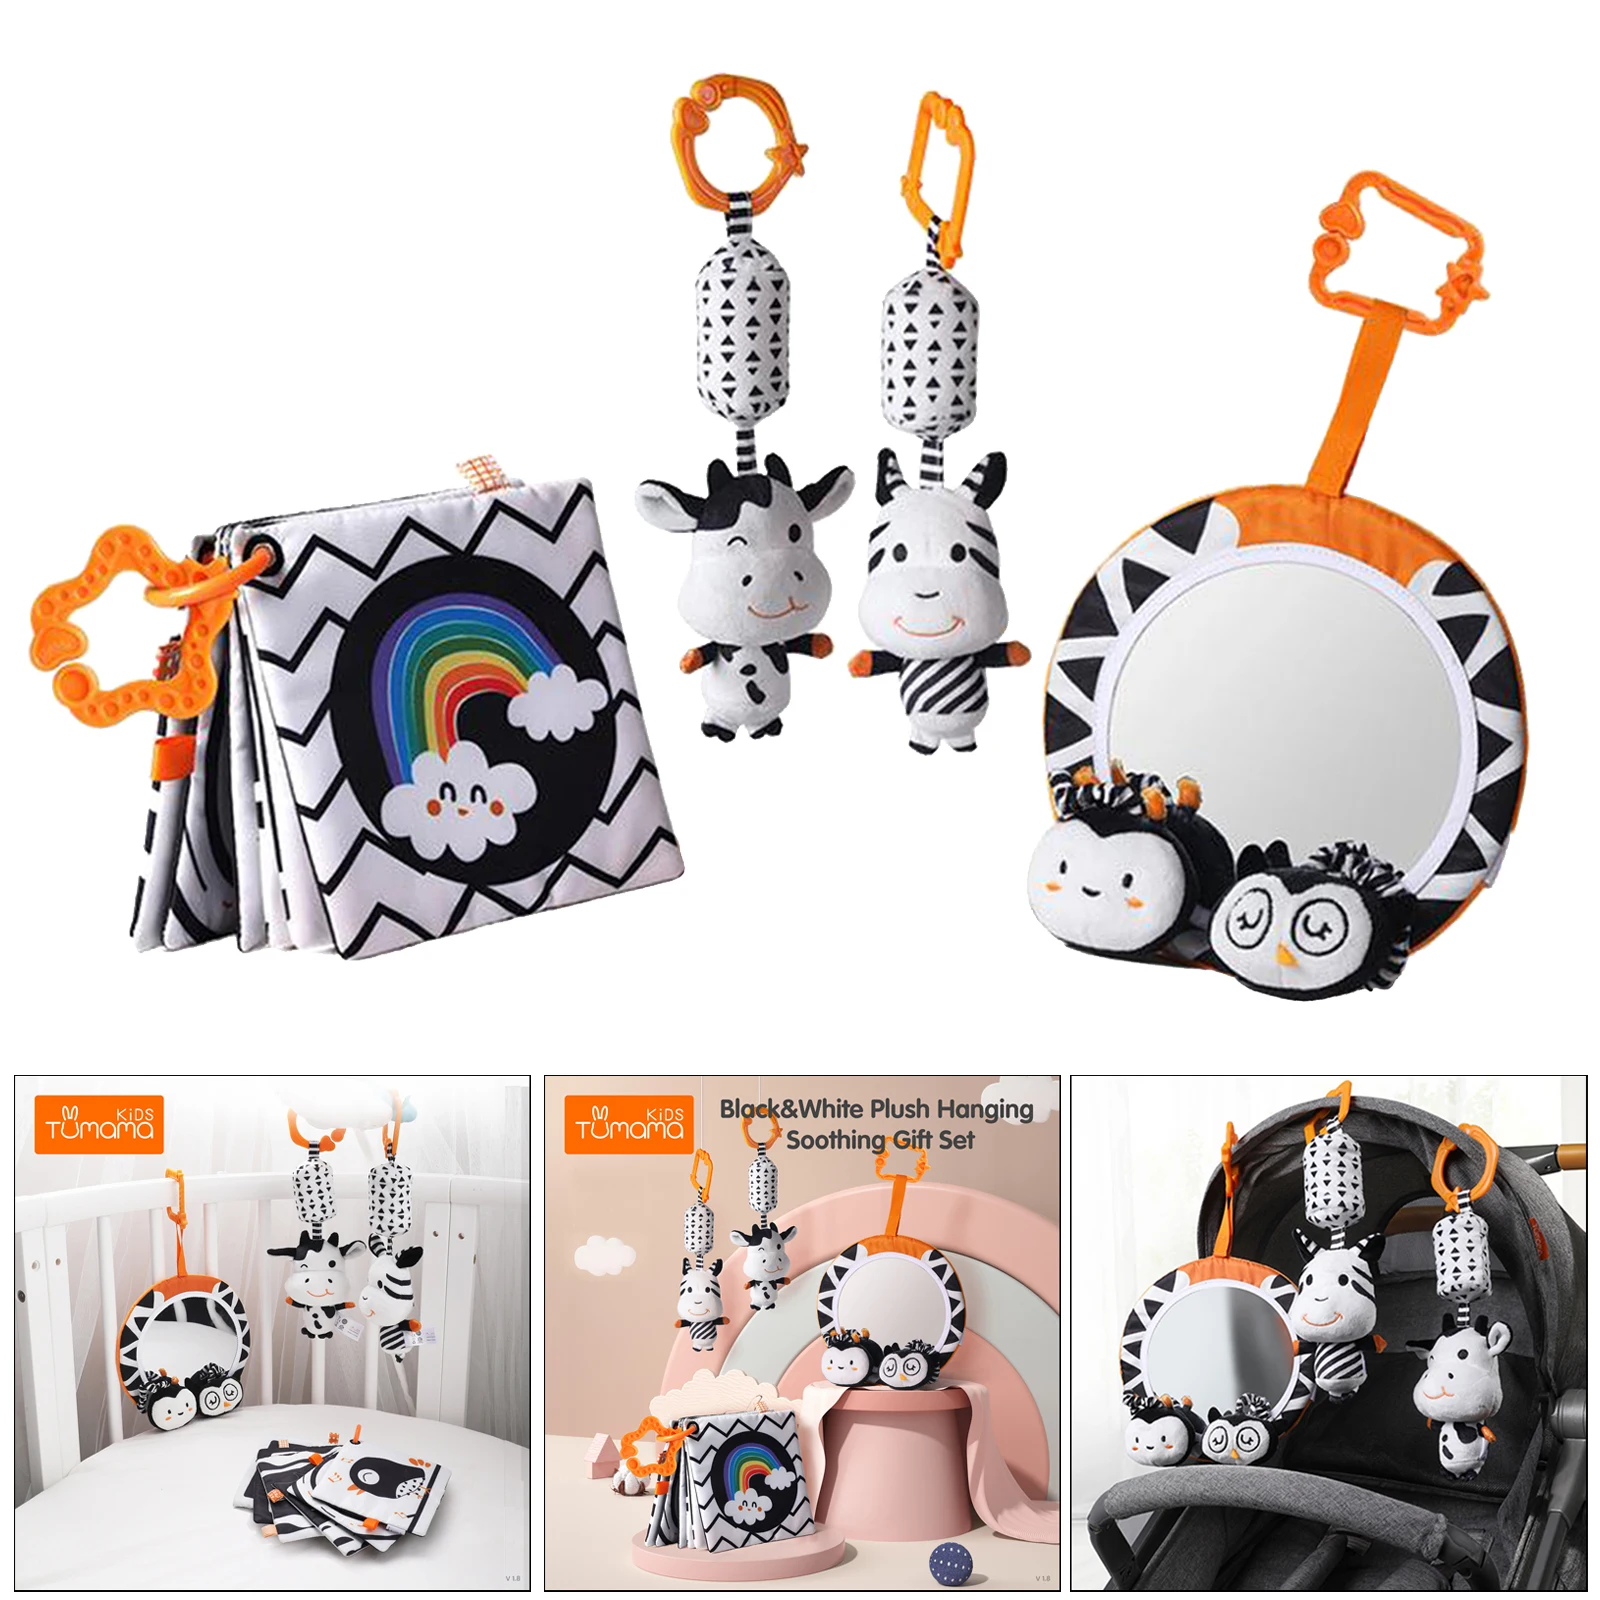 Baby Stroller Toy for Car Seat Plush Rattles Rings Tummy Mirror Cloth Book